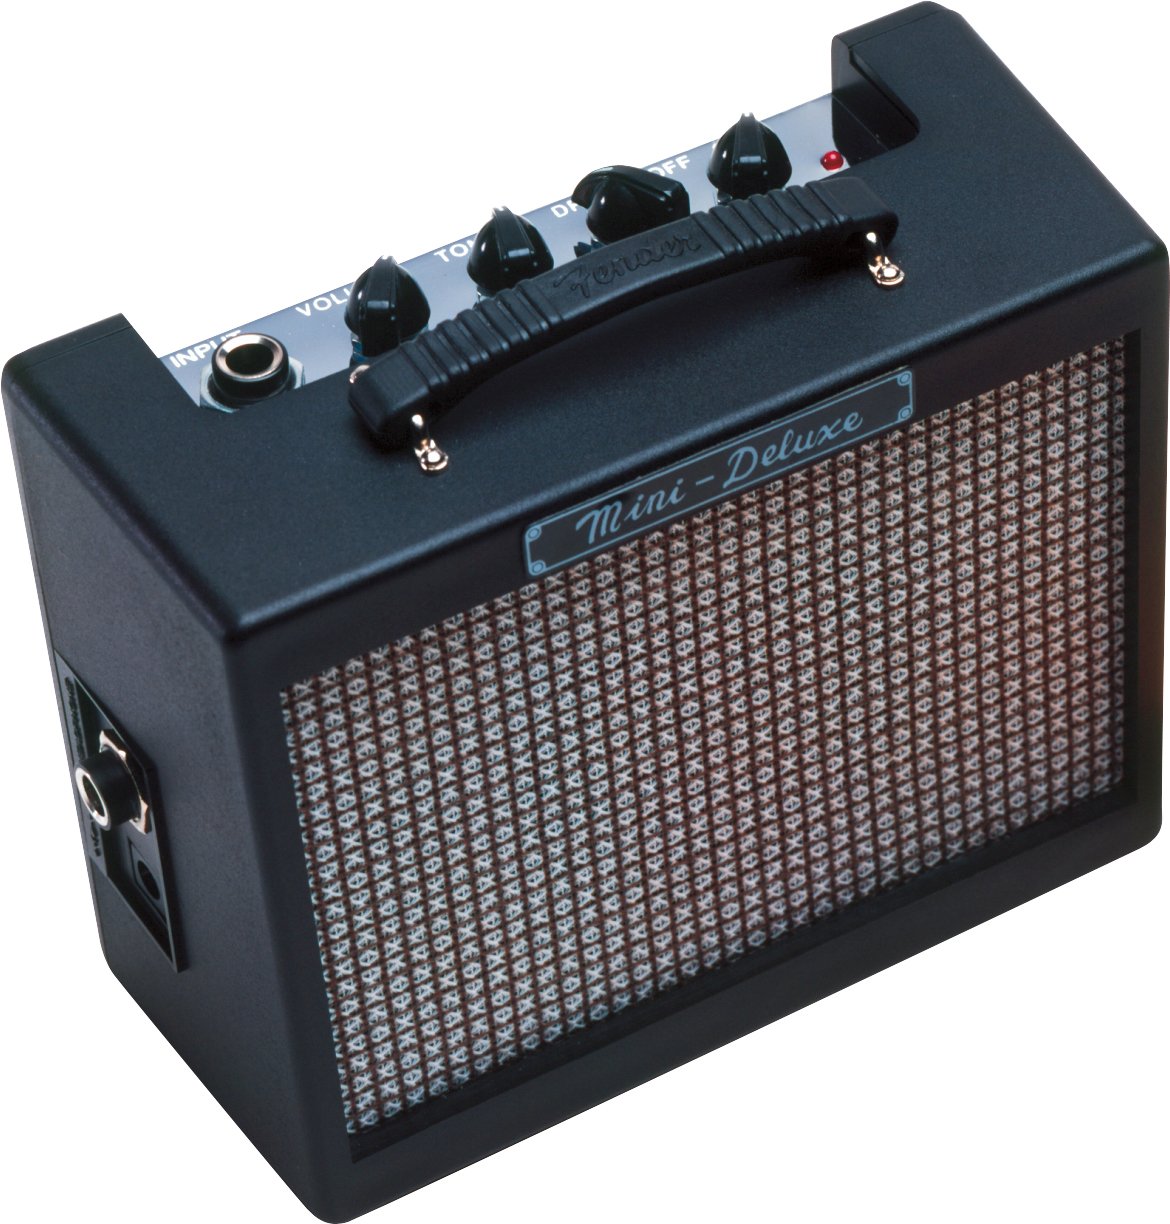 Fender Mini Deluxe Electric Guitar Amp, Portable Guitar Amp, 3 Watts, 7.48Dx11.42Wx3.54H Inches, Black